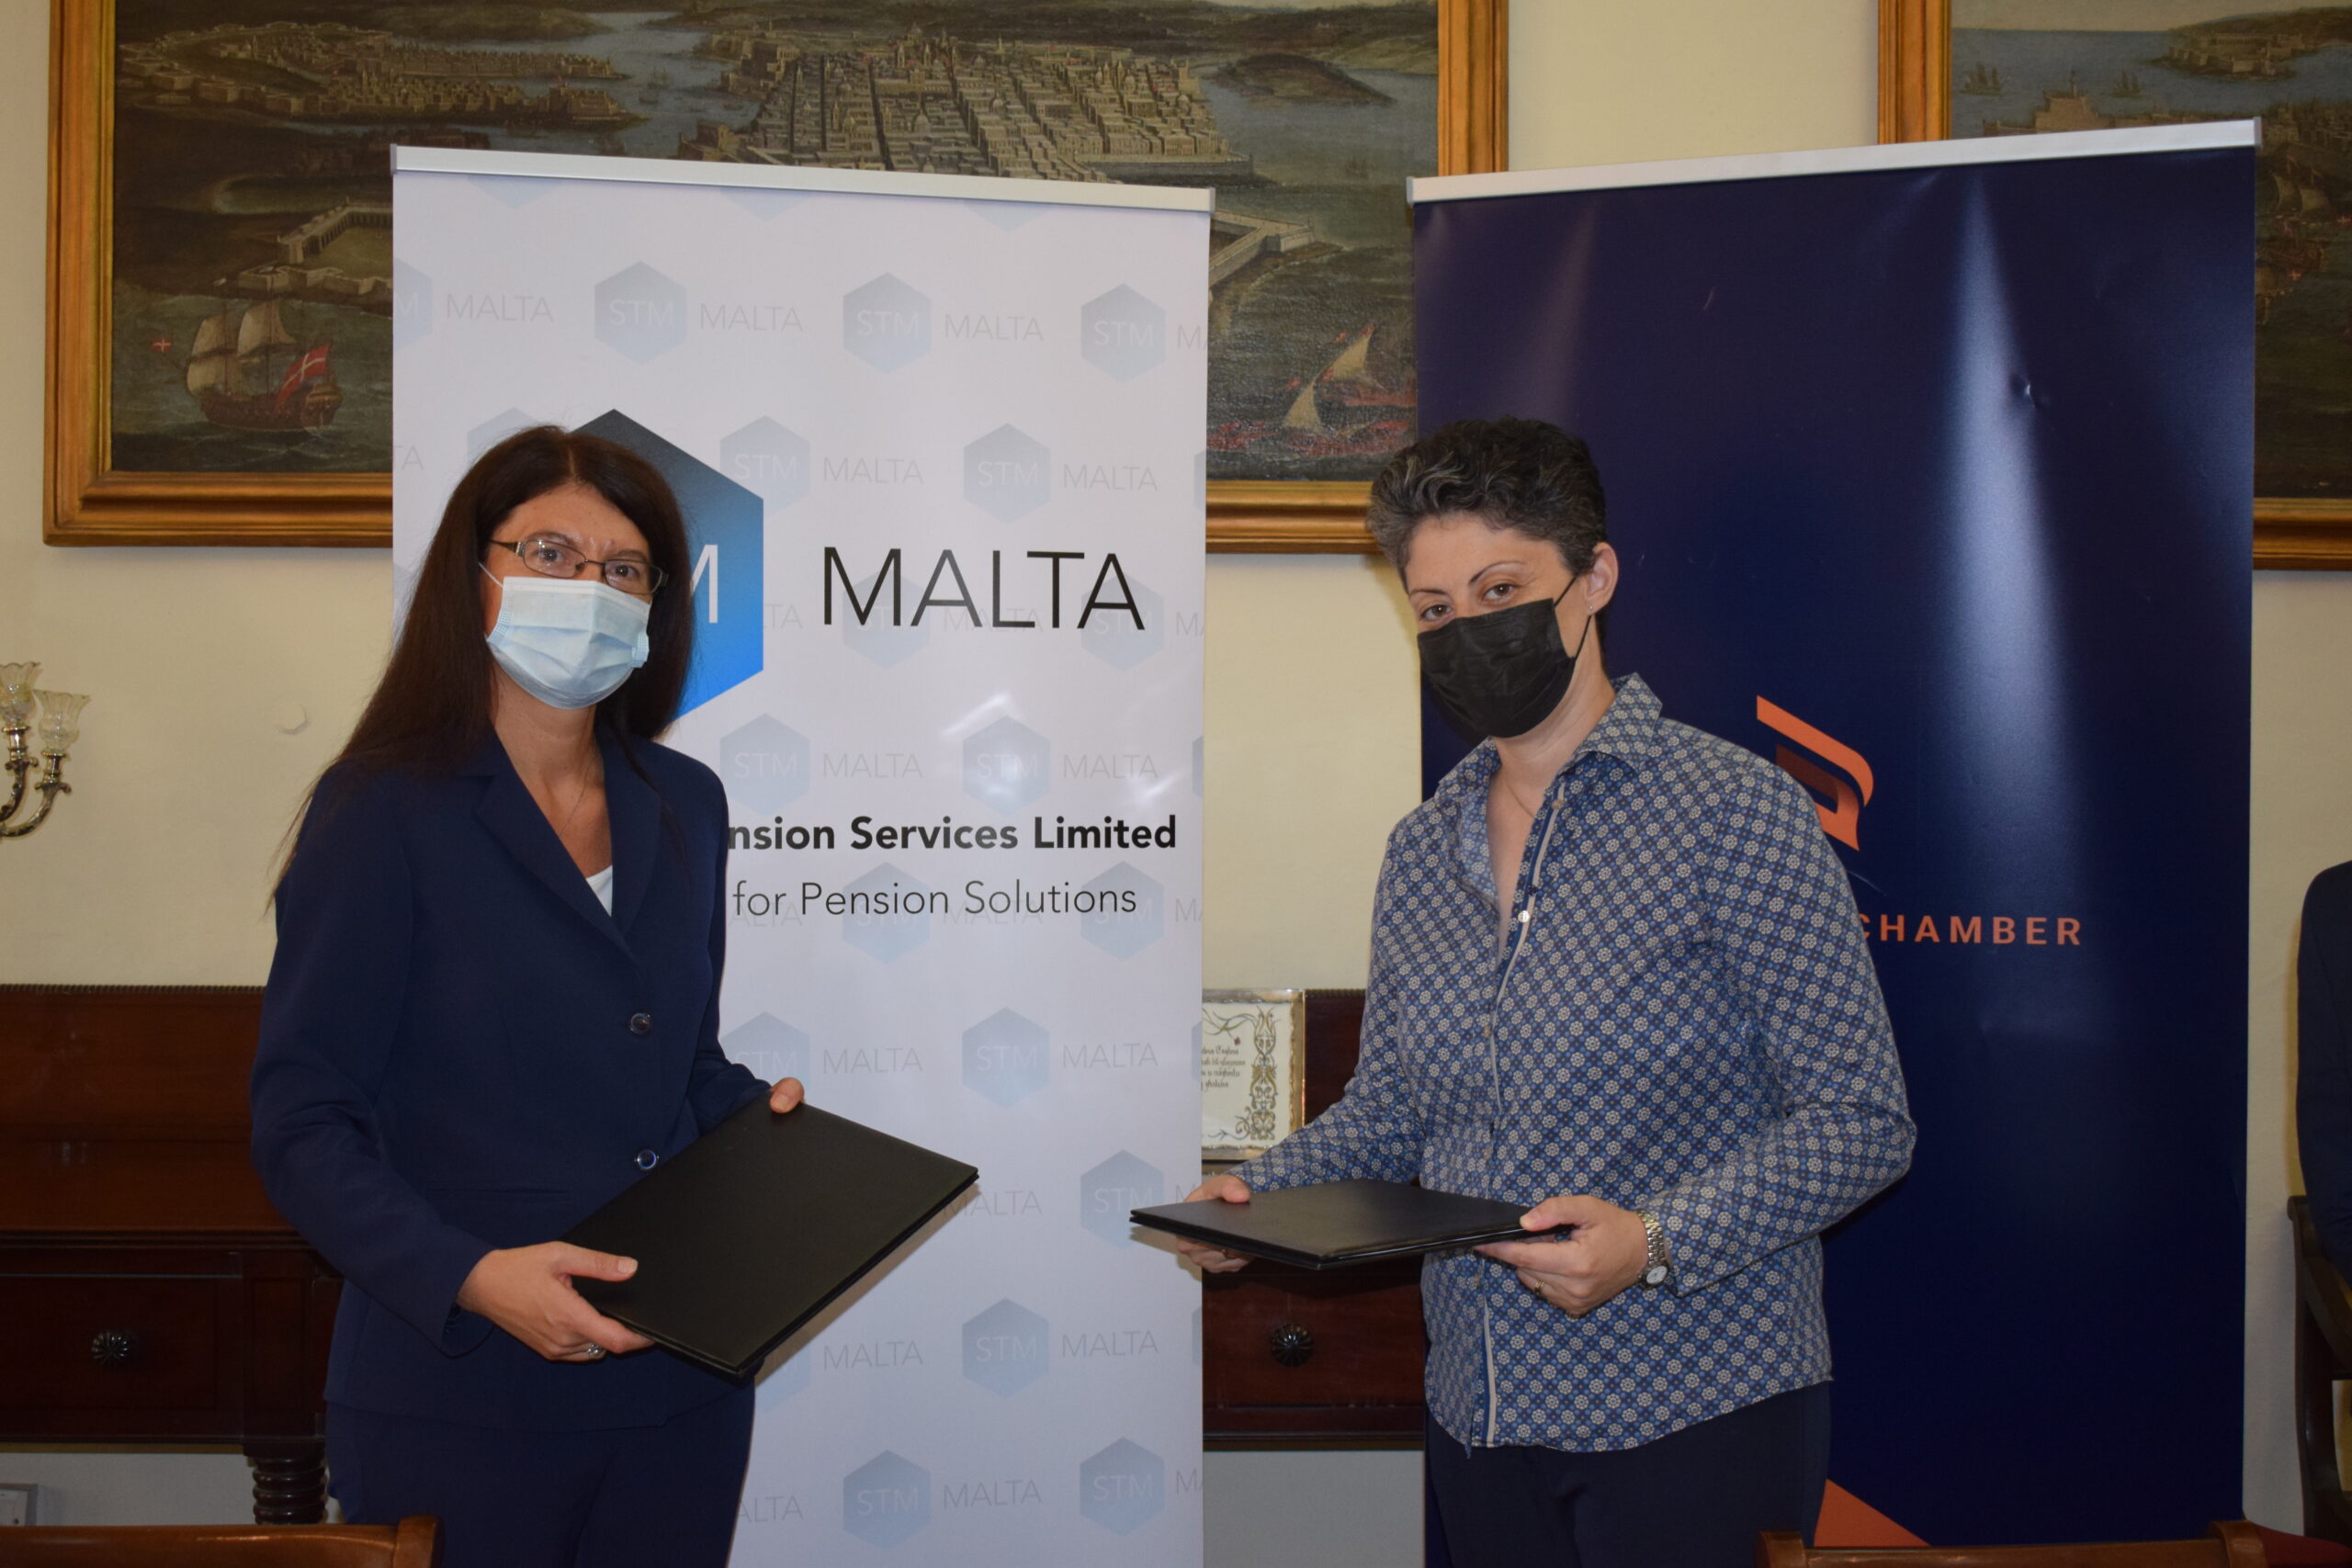 Supporting and promoting Malta’s pension sustainability through collaboration between The Malta Chamber and STM Malta